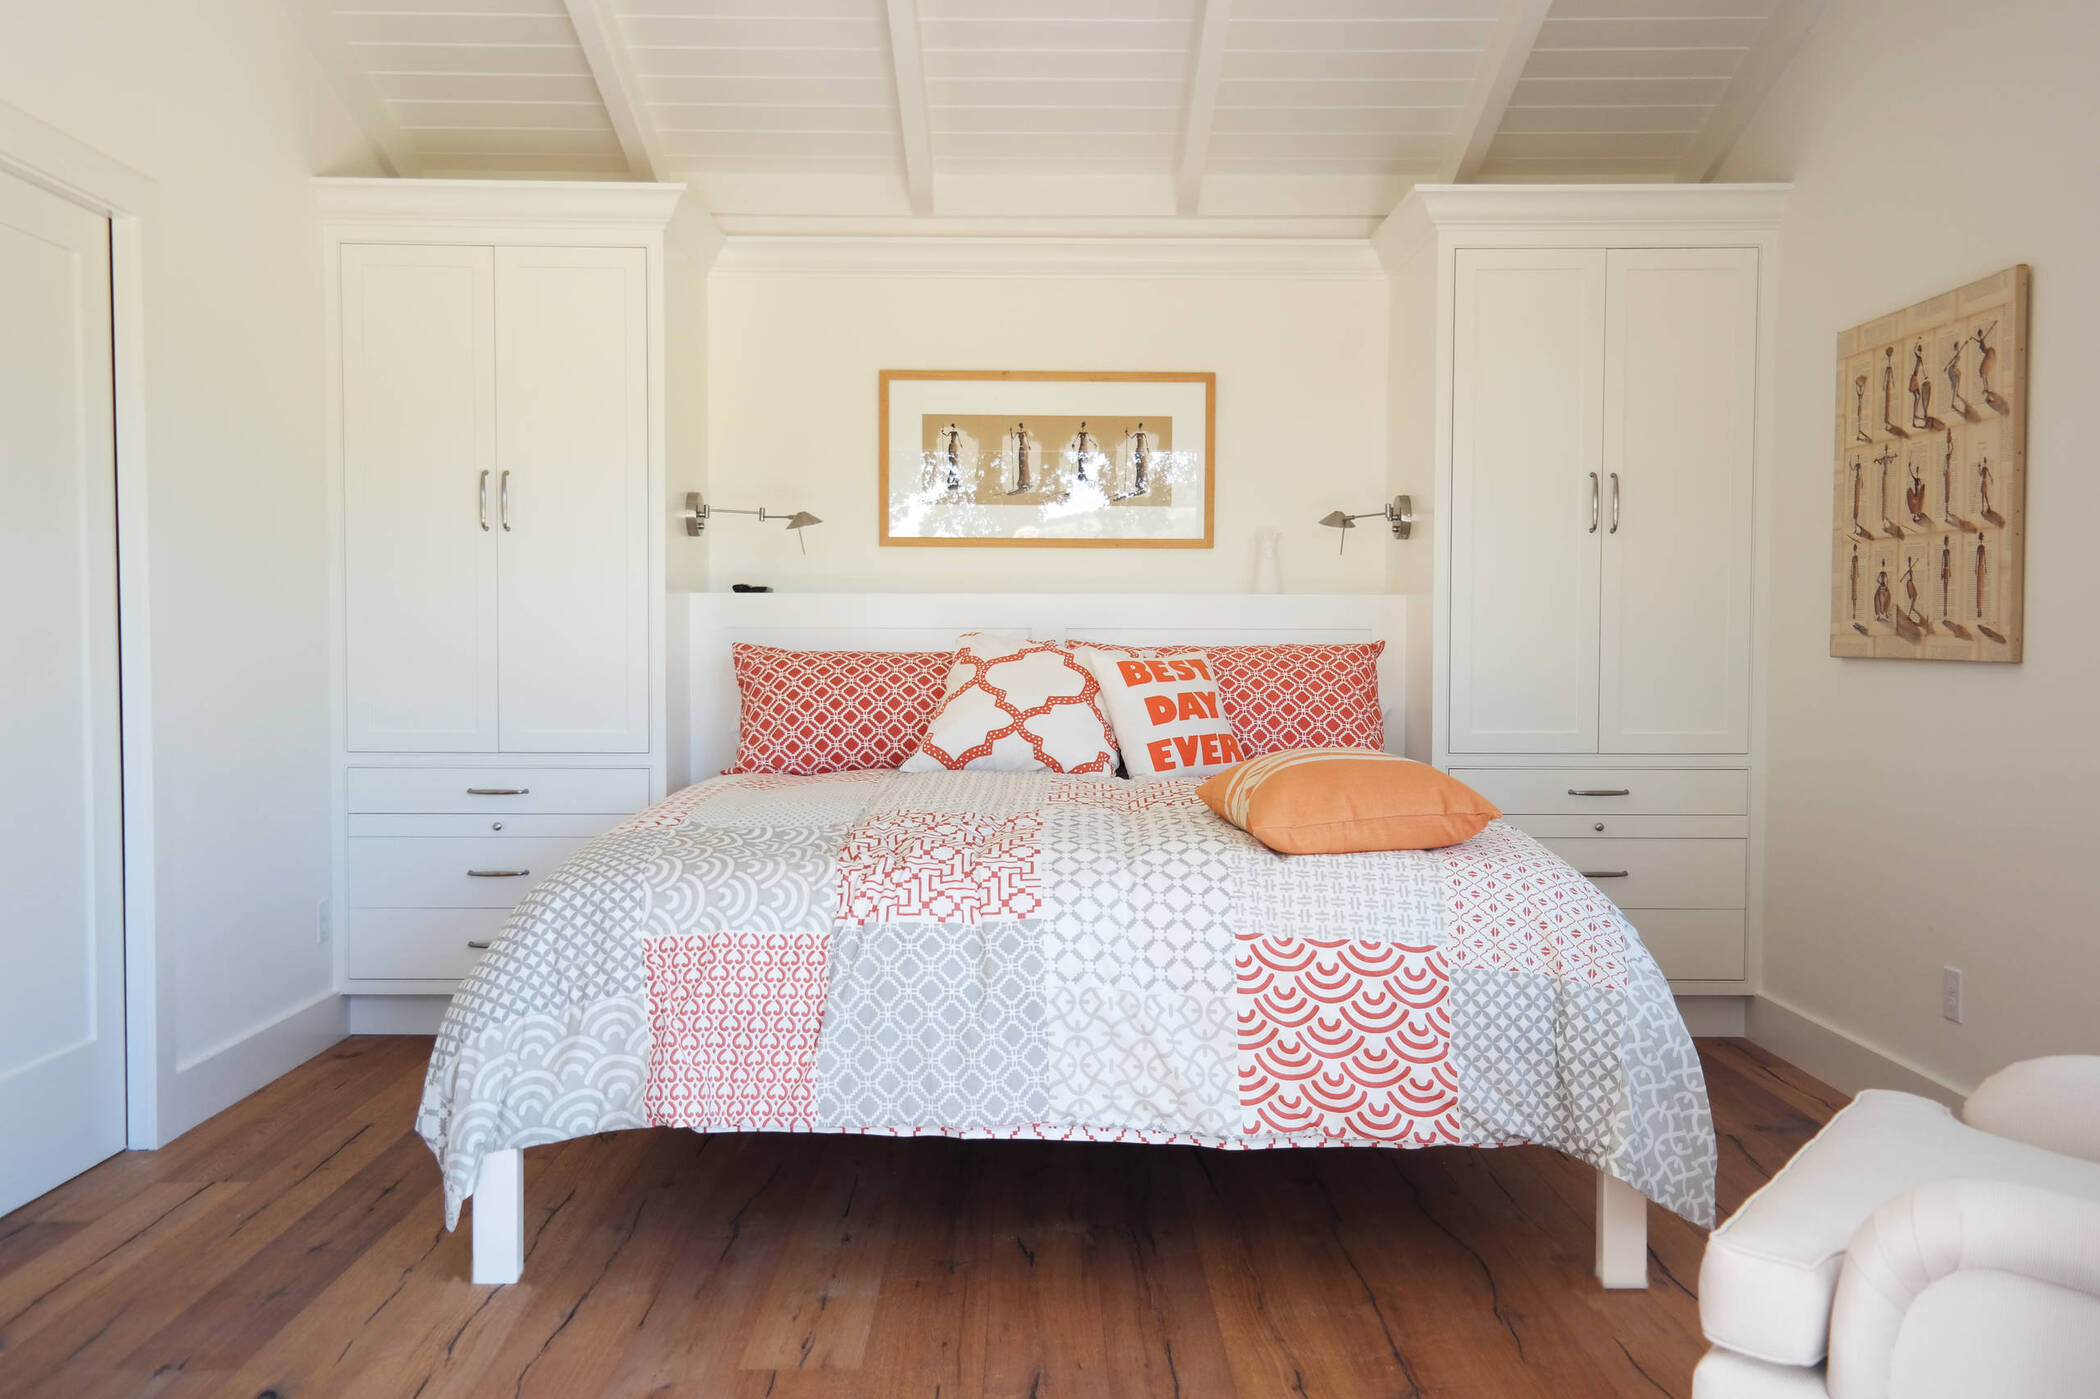 Where Should A Bed Be Placed In A Room? 5 Fail-Safe Positions